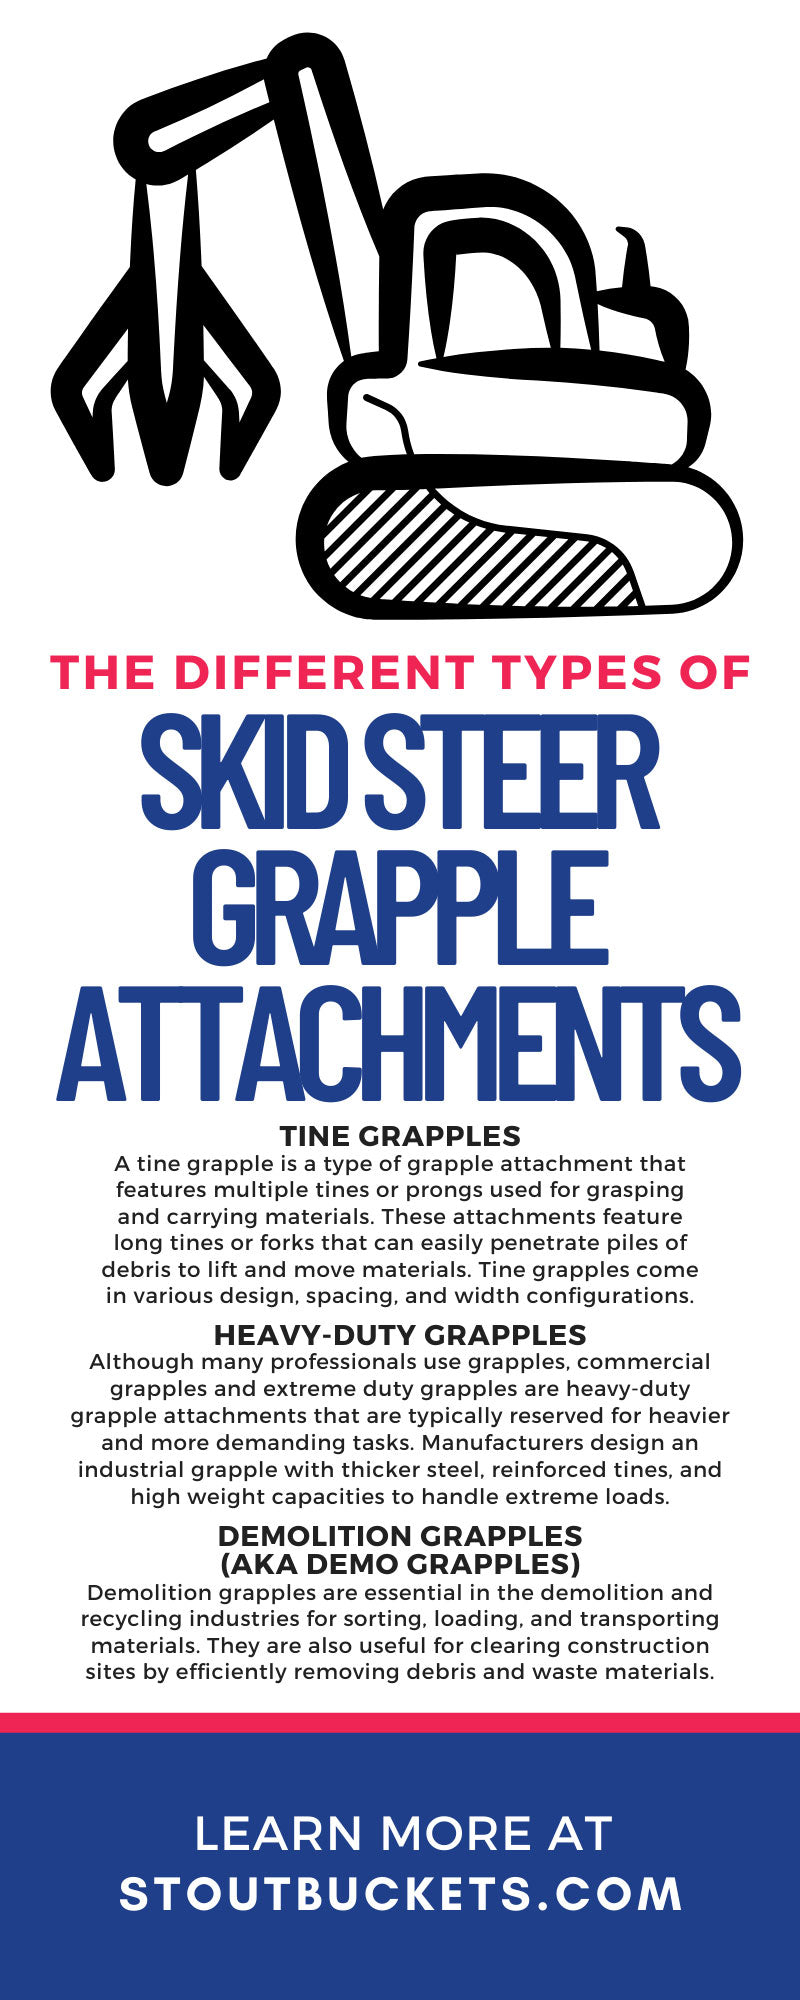 The Different Types of Skid Steer Grapple Attachments